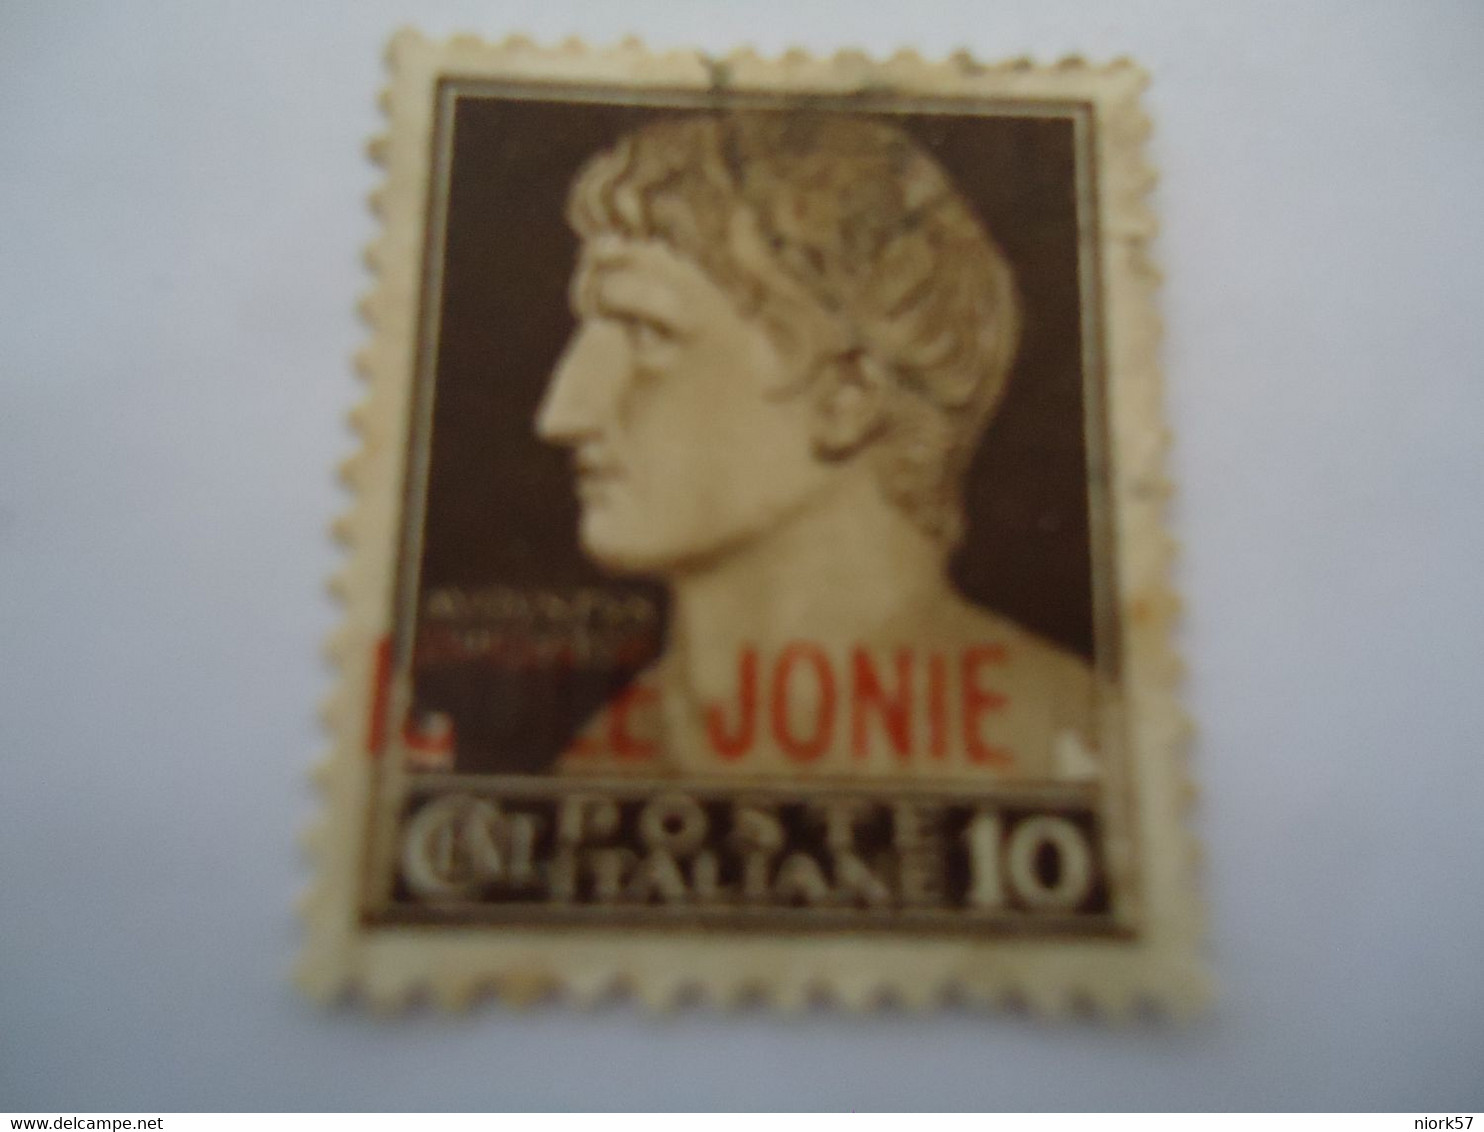 GREECE  USED ITALY   STAMPS JONIE - Ionische Inseln